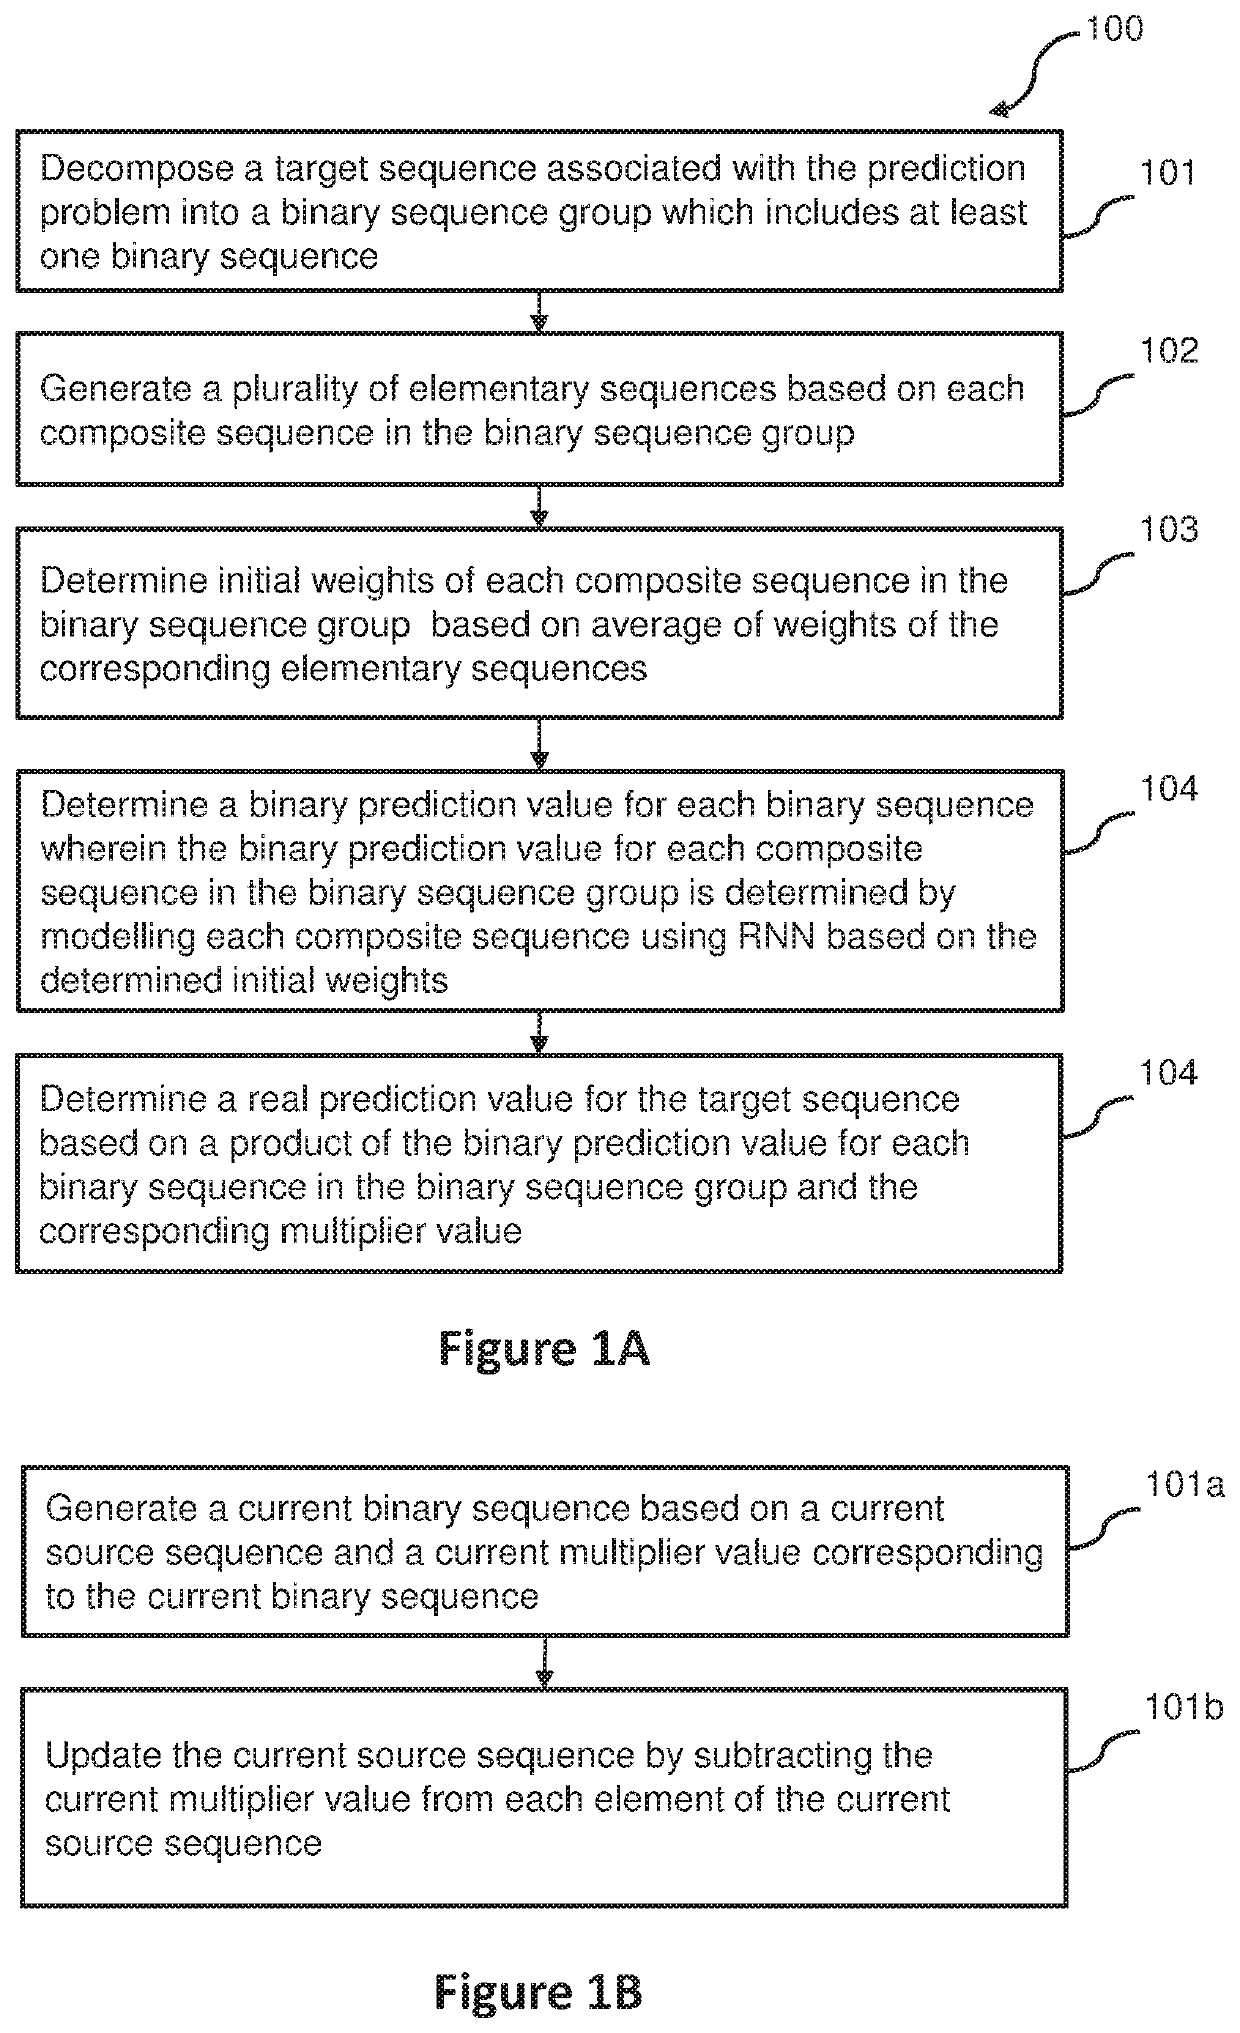 Method and system for solving a prediction problem